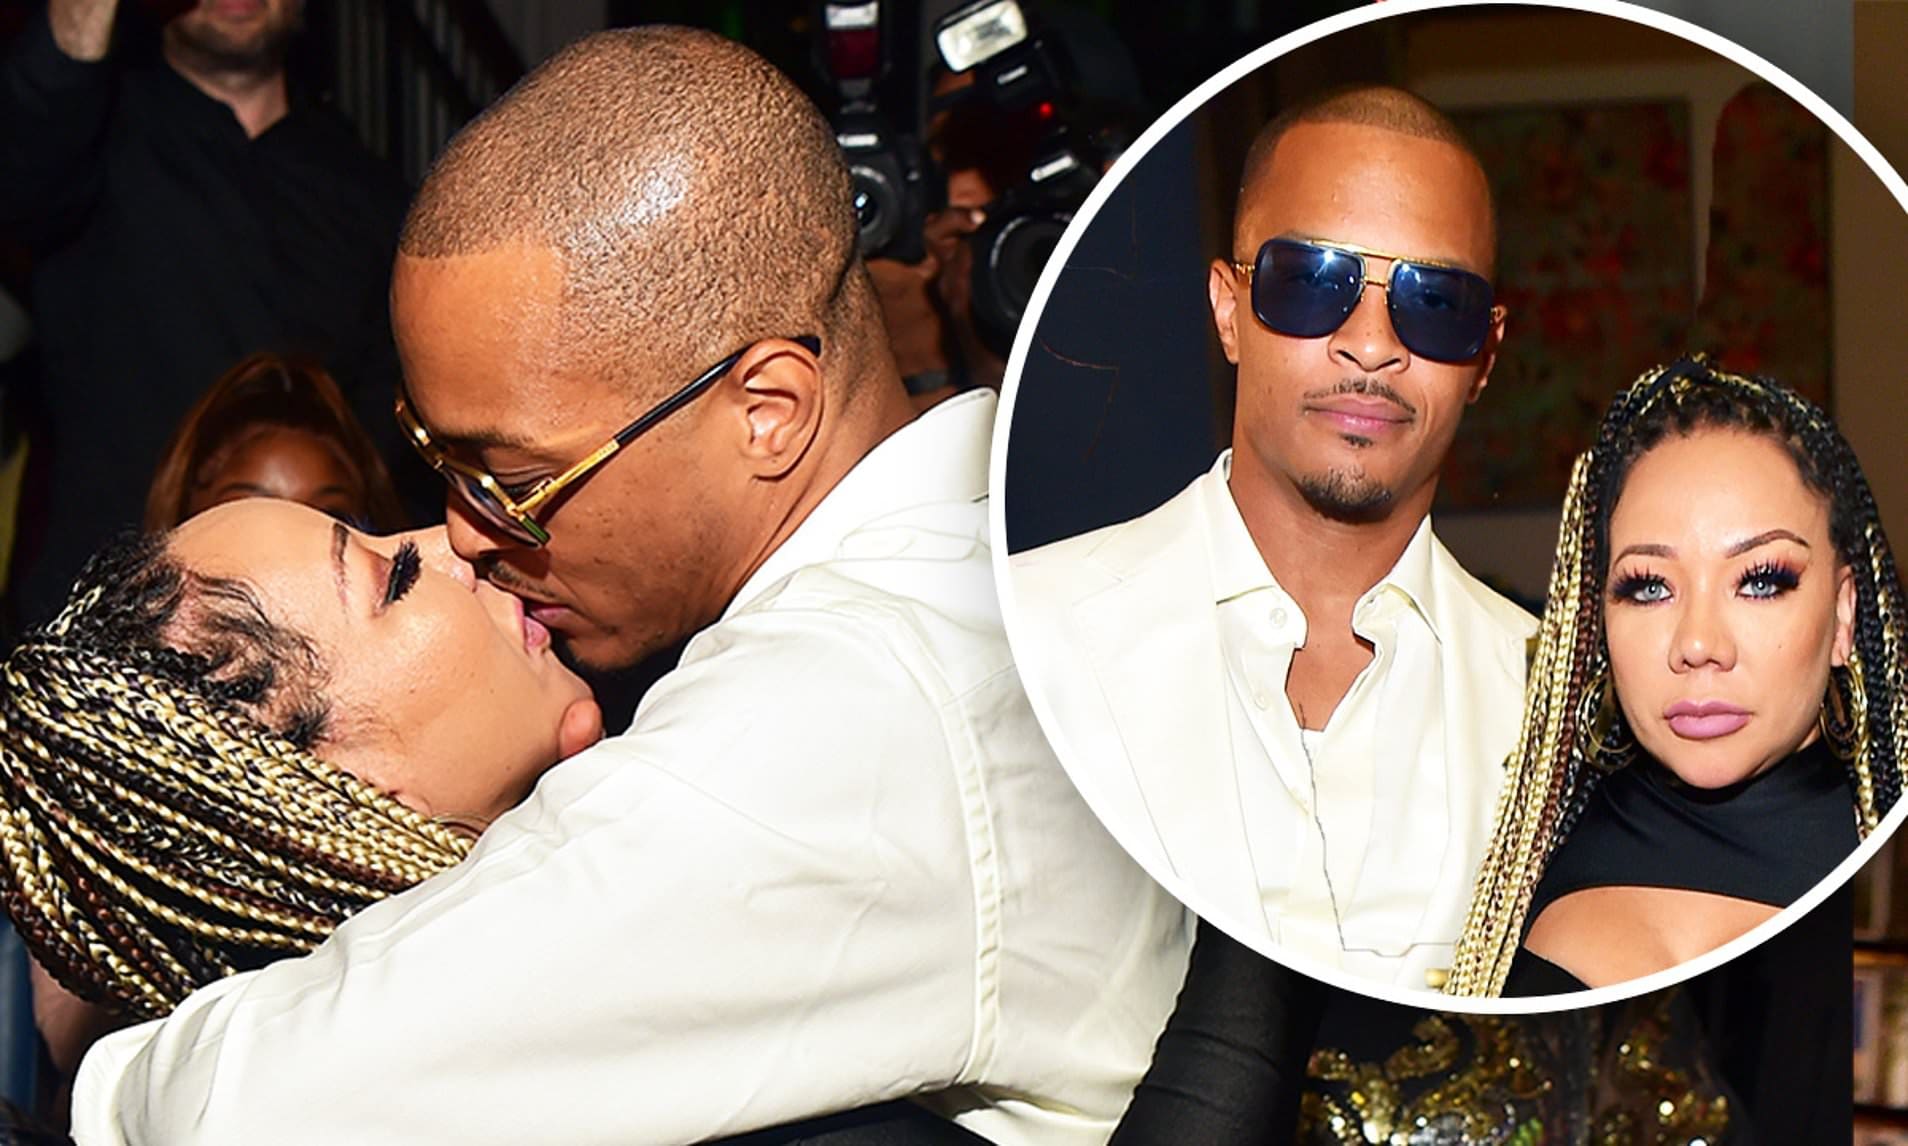 T.I. Showers Tiny Harris SWith Love For Her Birthday - See The Surprise The Rapper Prepared For His Queen On This 'Glorious Day Of Life'